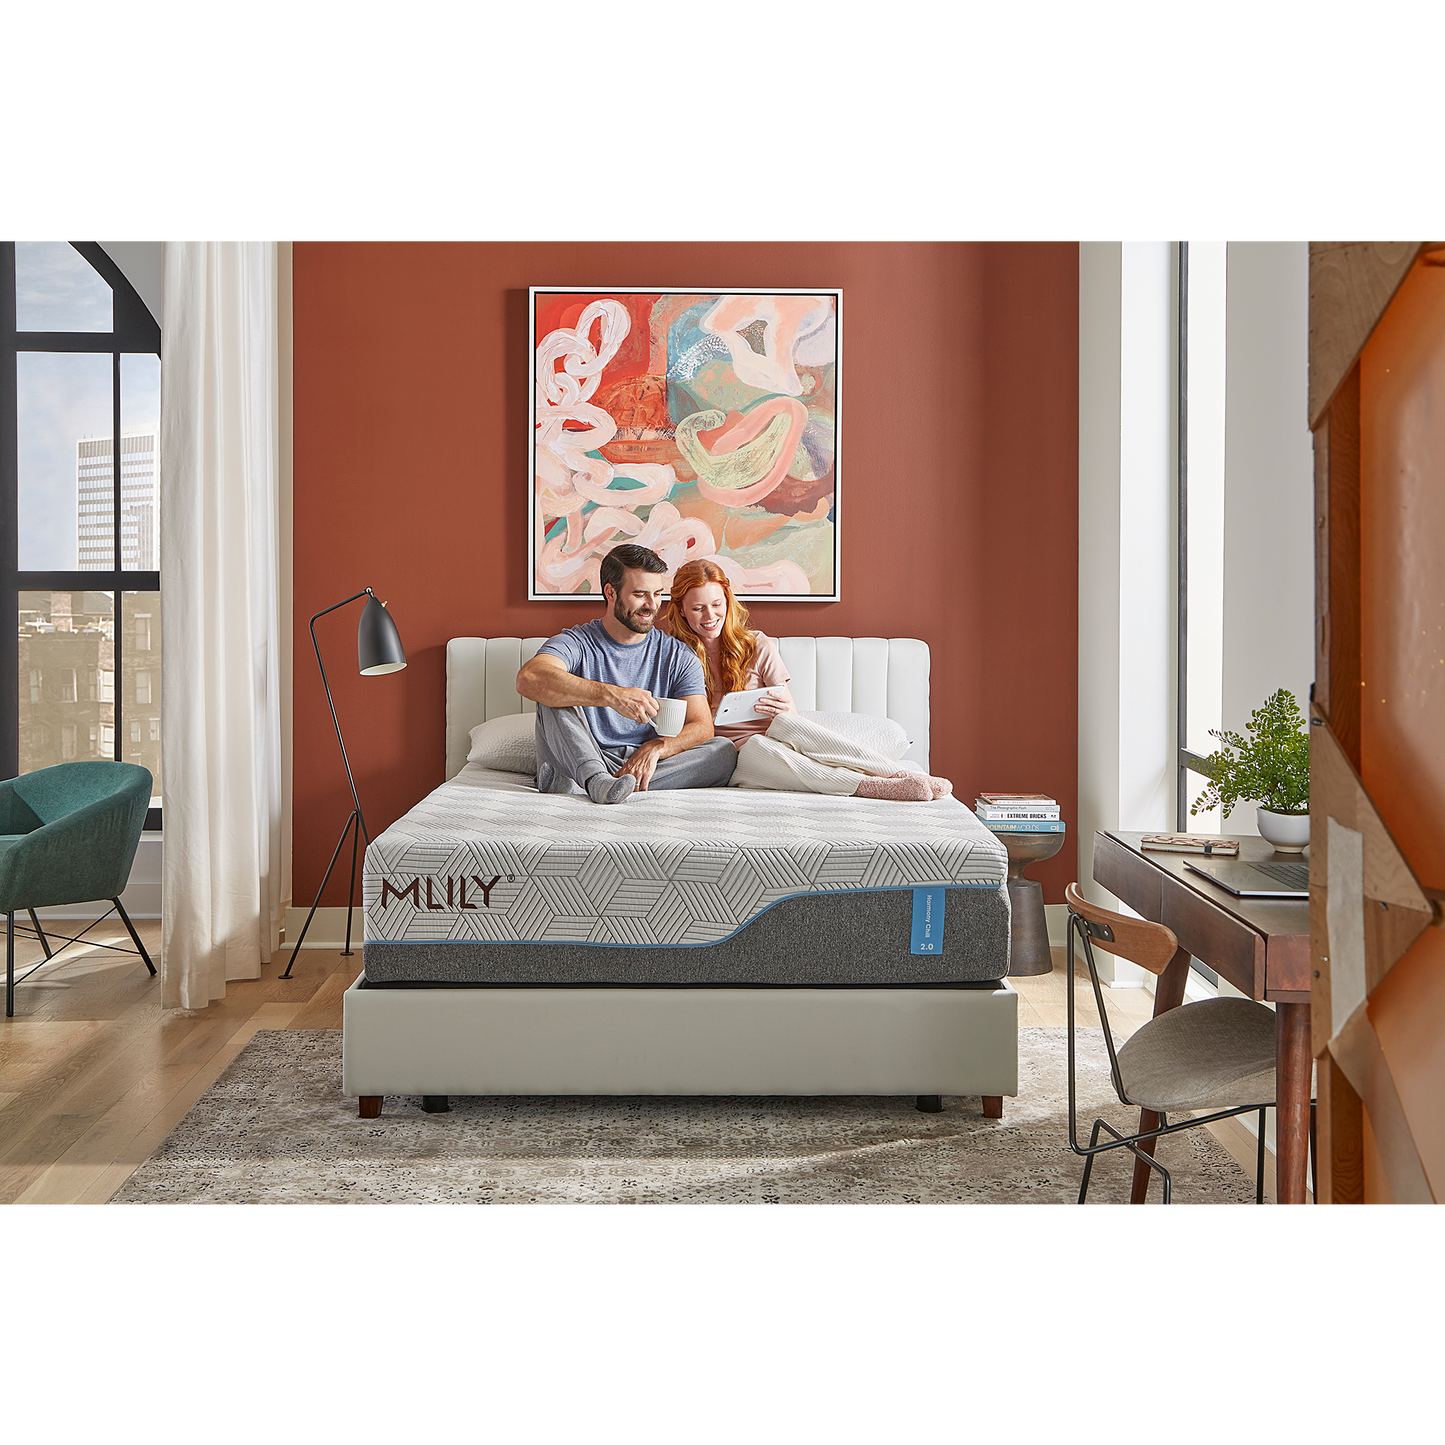 Harmony Chill 2.0 13" Memory Foam Mattress With Advanced Temperature Regulation Inside Of A Bedroom With A Man And Woman Sitting Upright